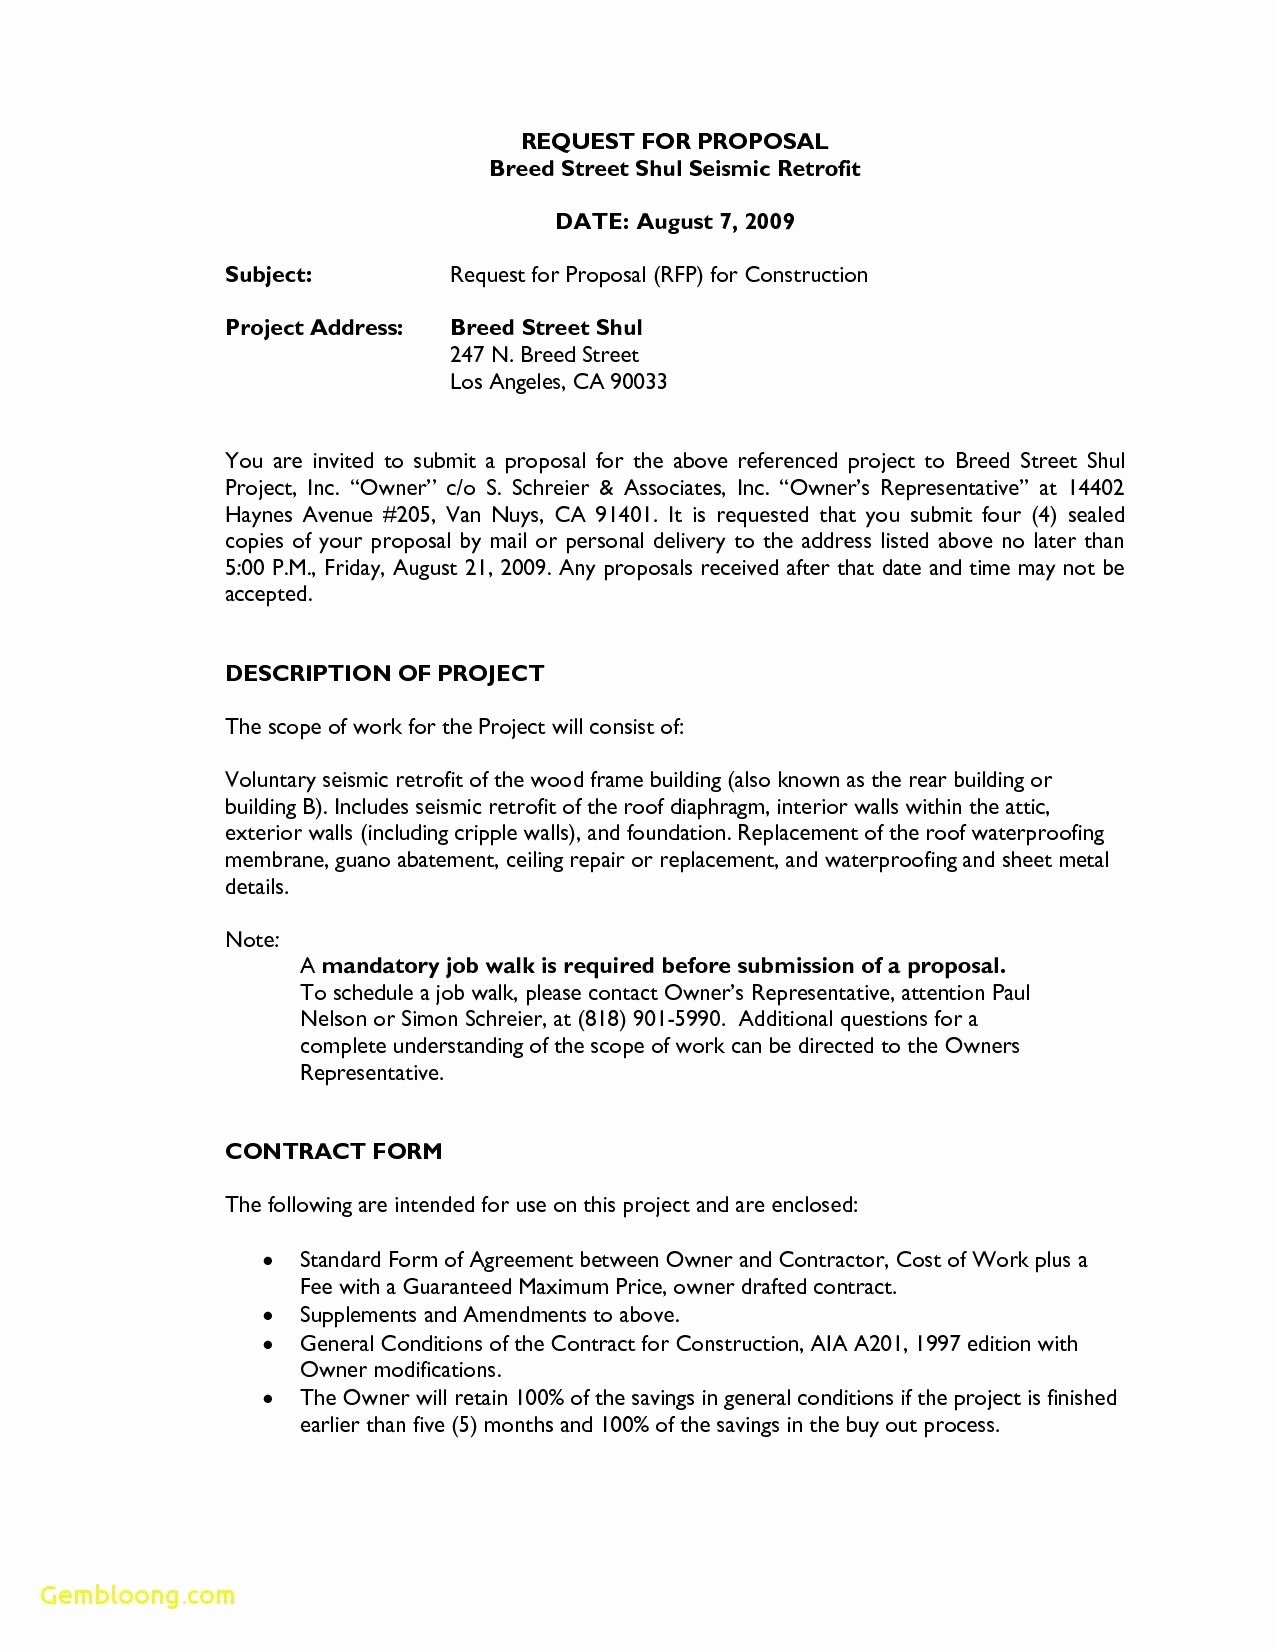 Request for Information Template Construction Beautiful Construction Request for Proposal Template Examples